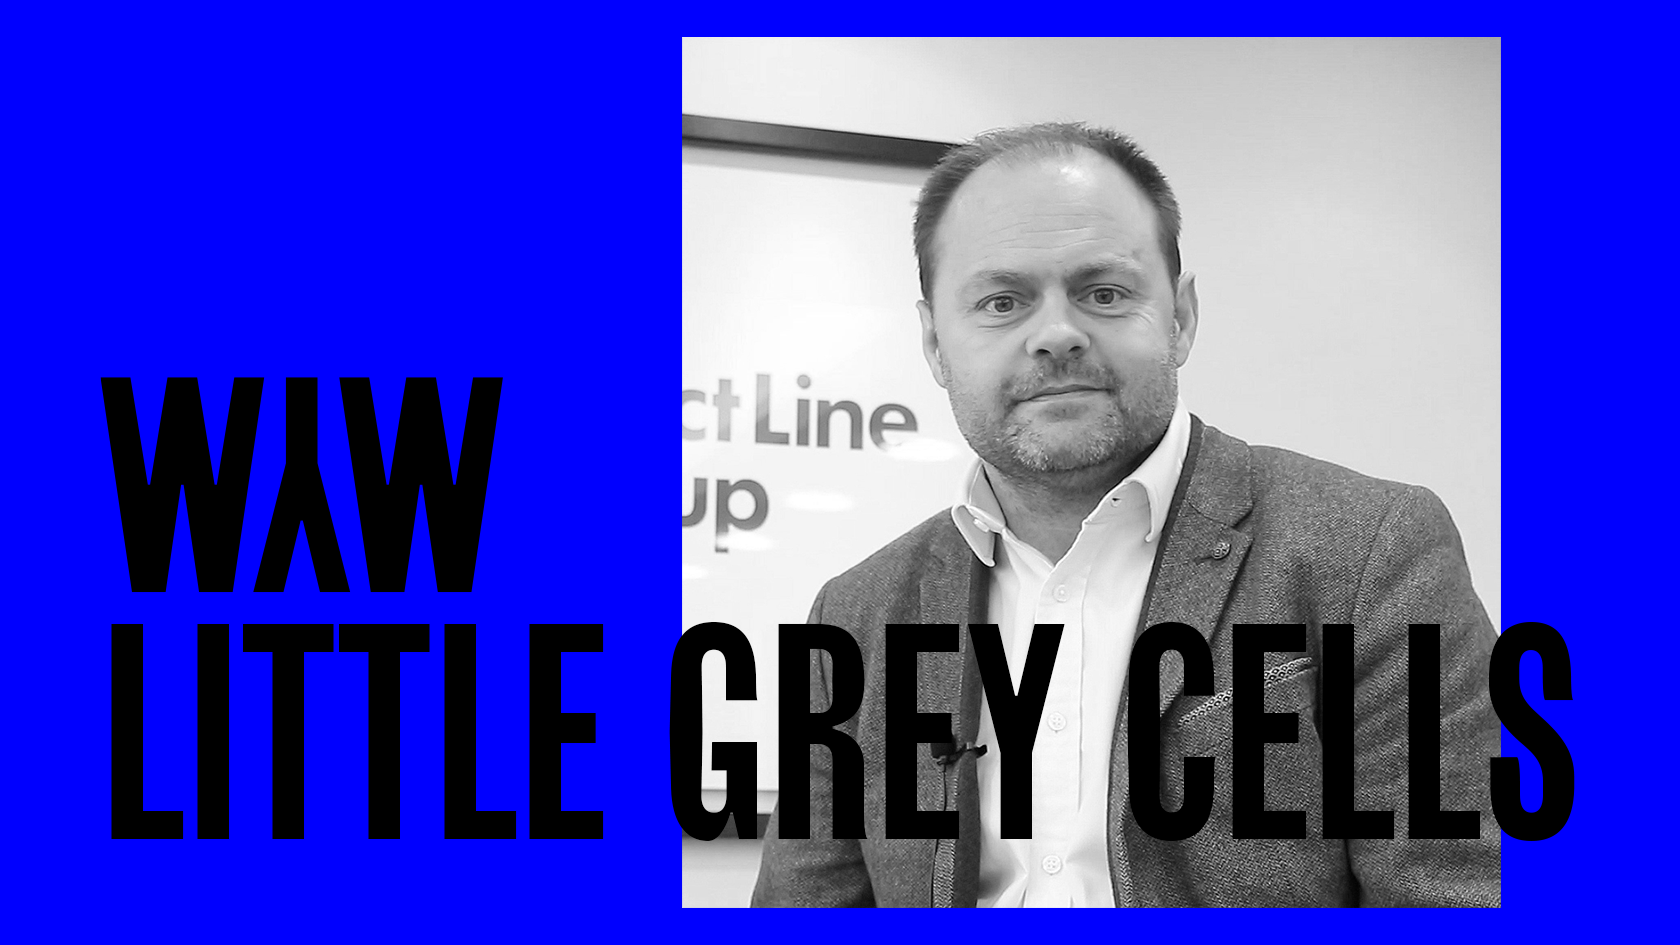 Little Grey Cells: Direct Line’s Mark Evans on “Whole-Brained” Marketing